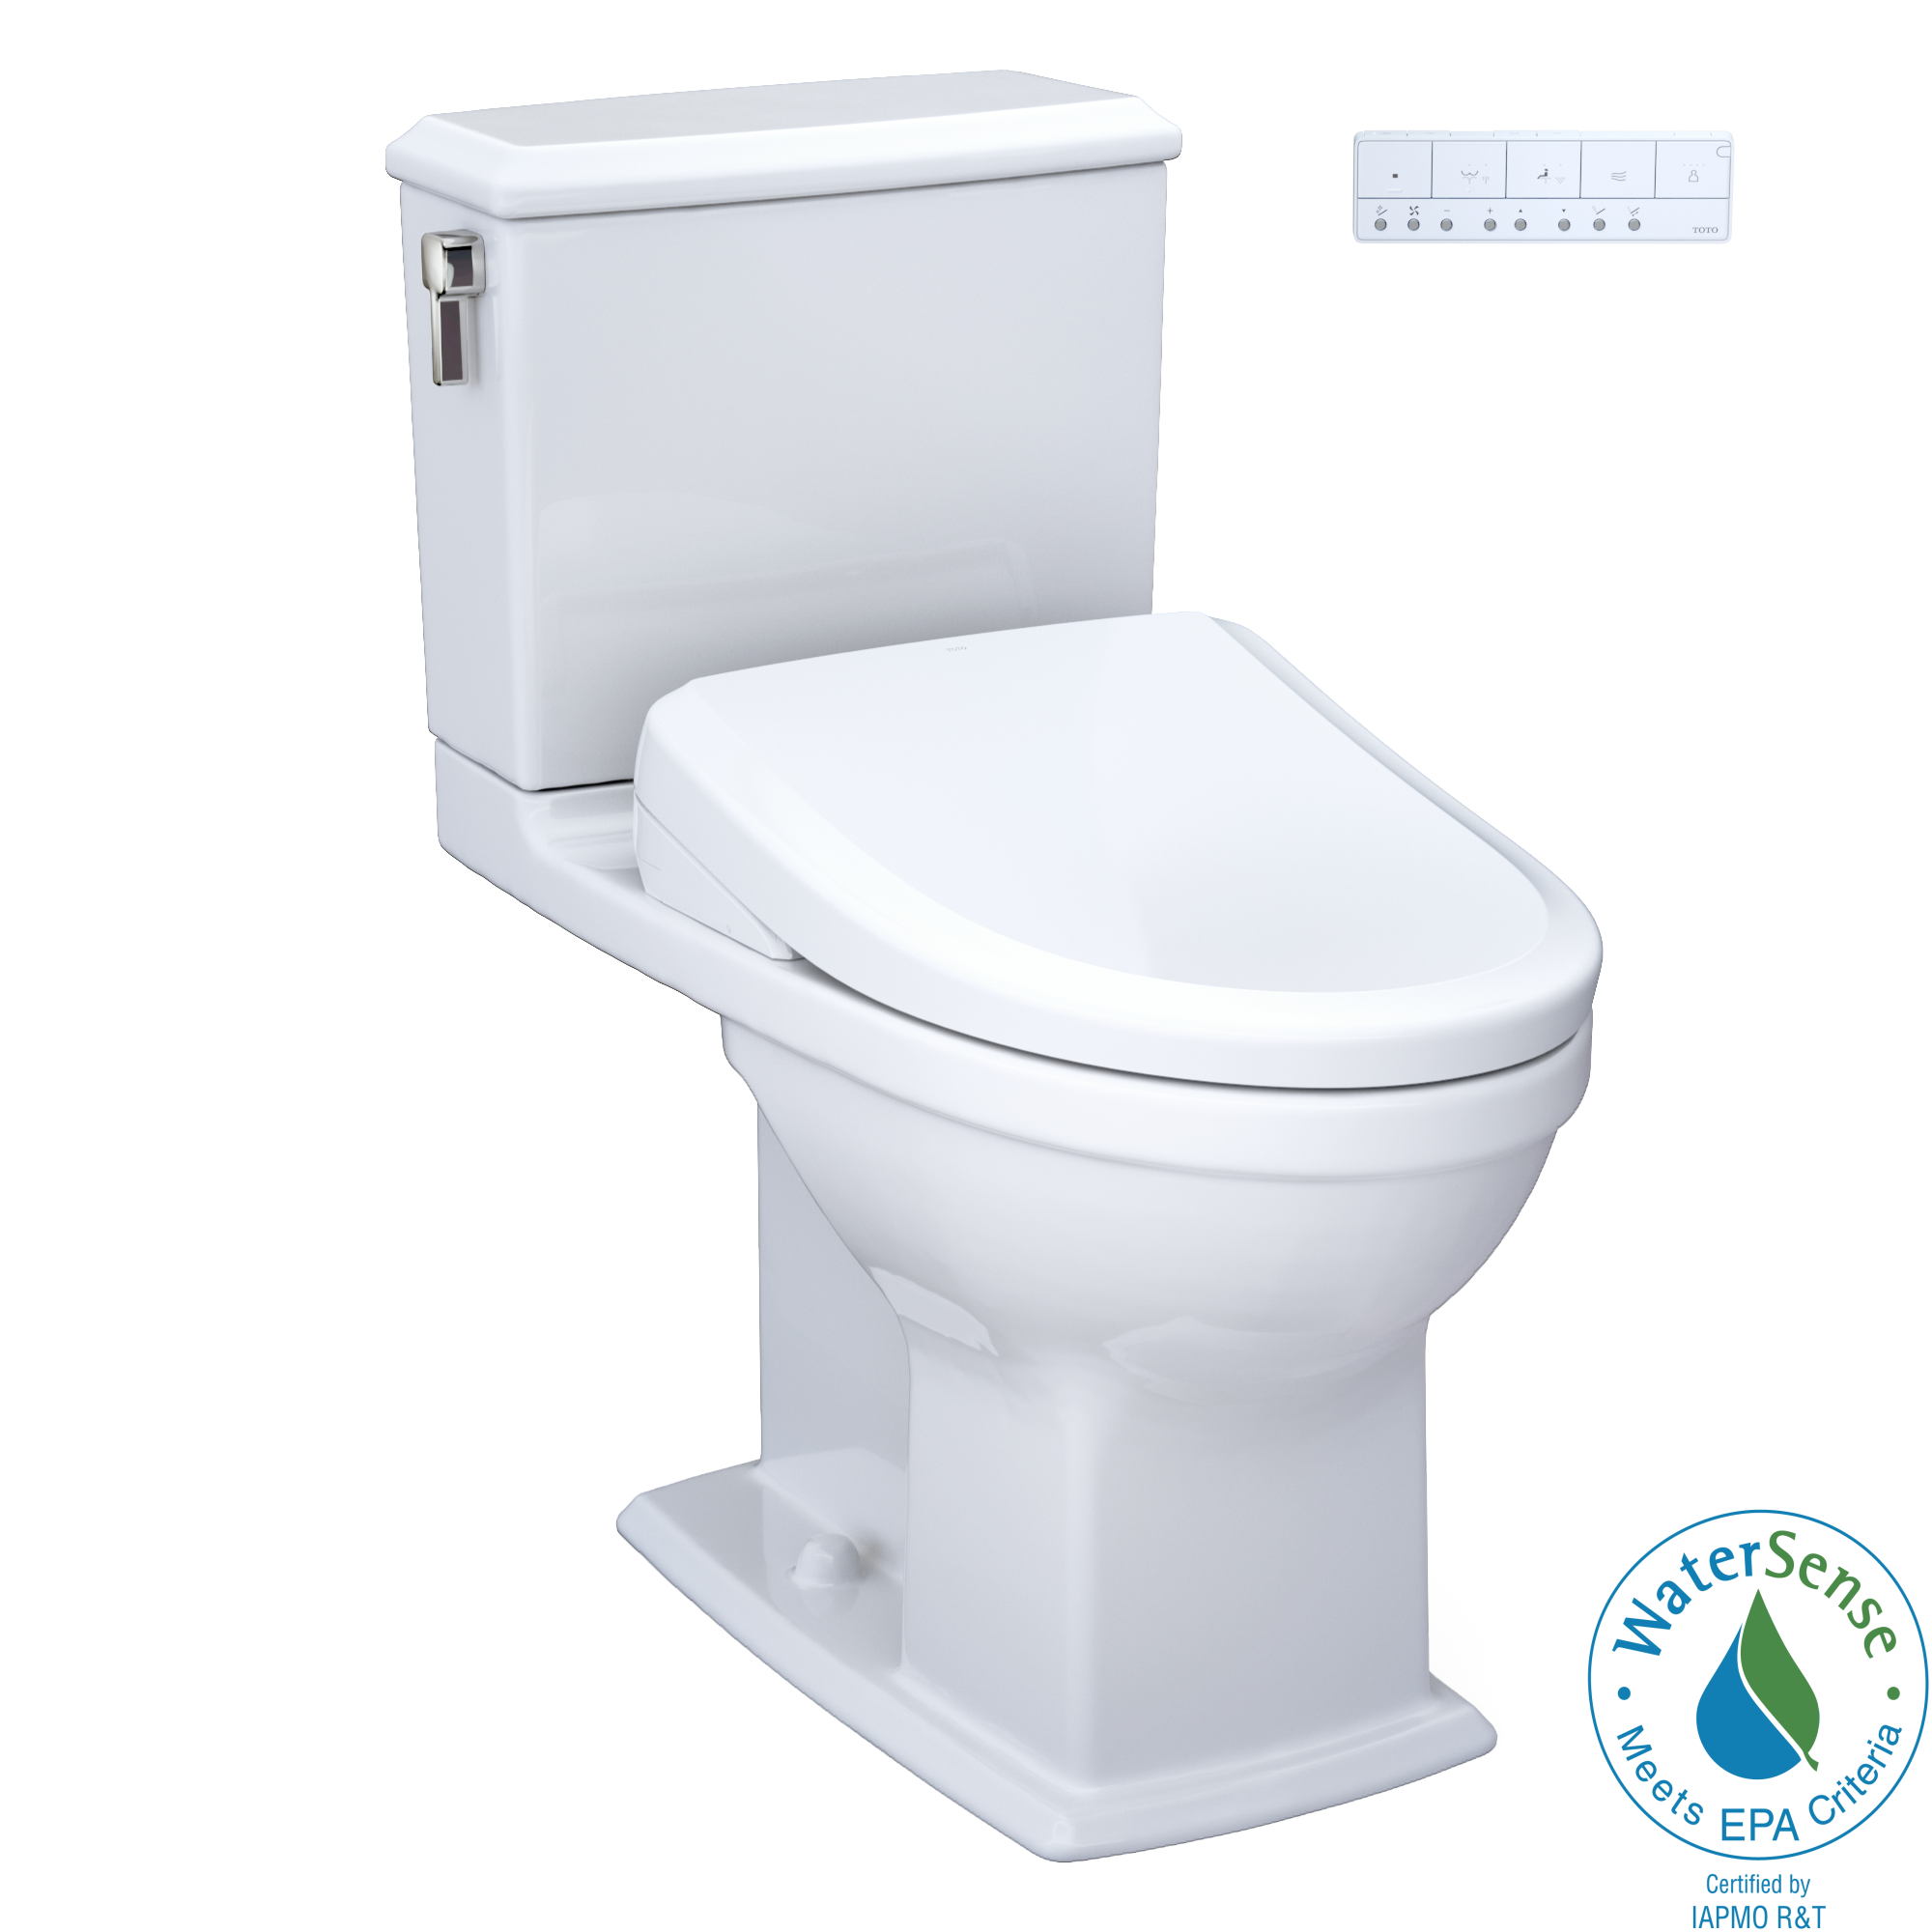 TOTO WASHLET+ Connelly Two-Piece Elongated Dual Flush 1.28 and 0.9 GPF Toilet and Classic WASHLET S7A Classic Bidet Seat, Cotton White - MW4944734CEMFG#01, MW4944734CEMFGA#01